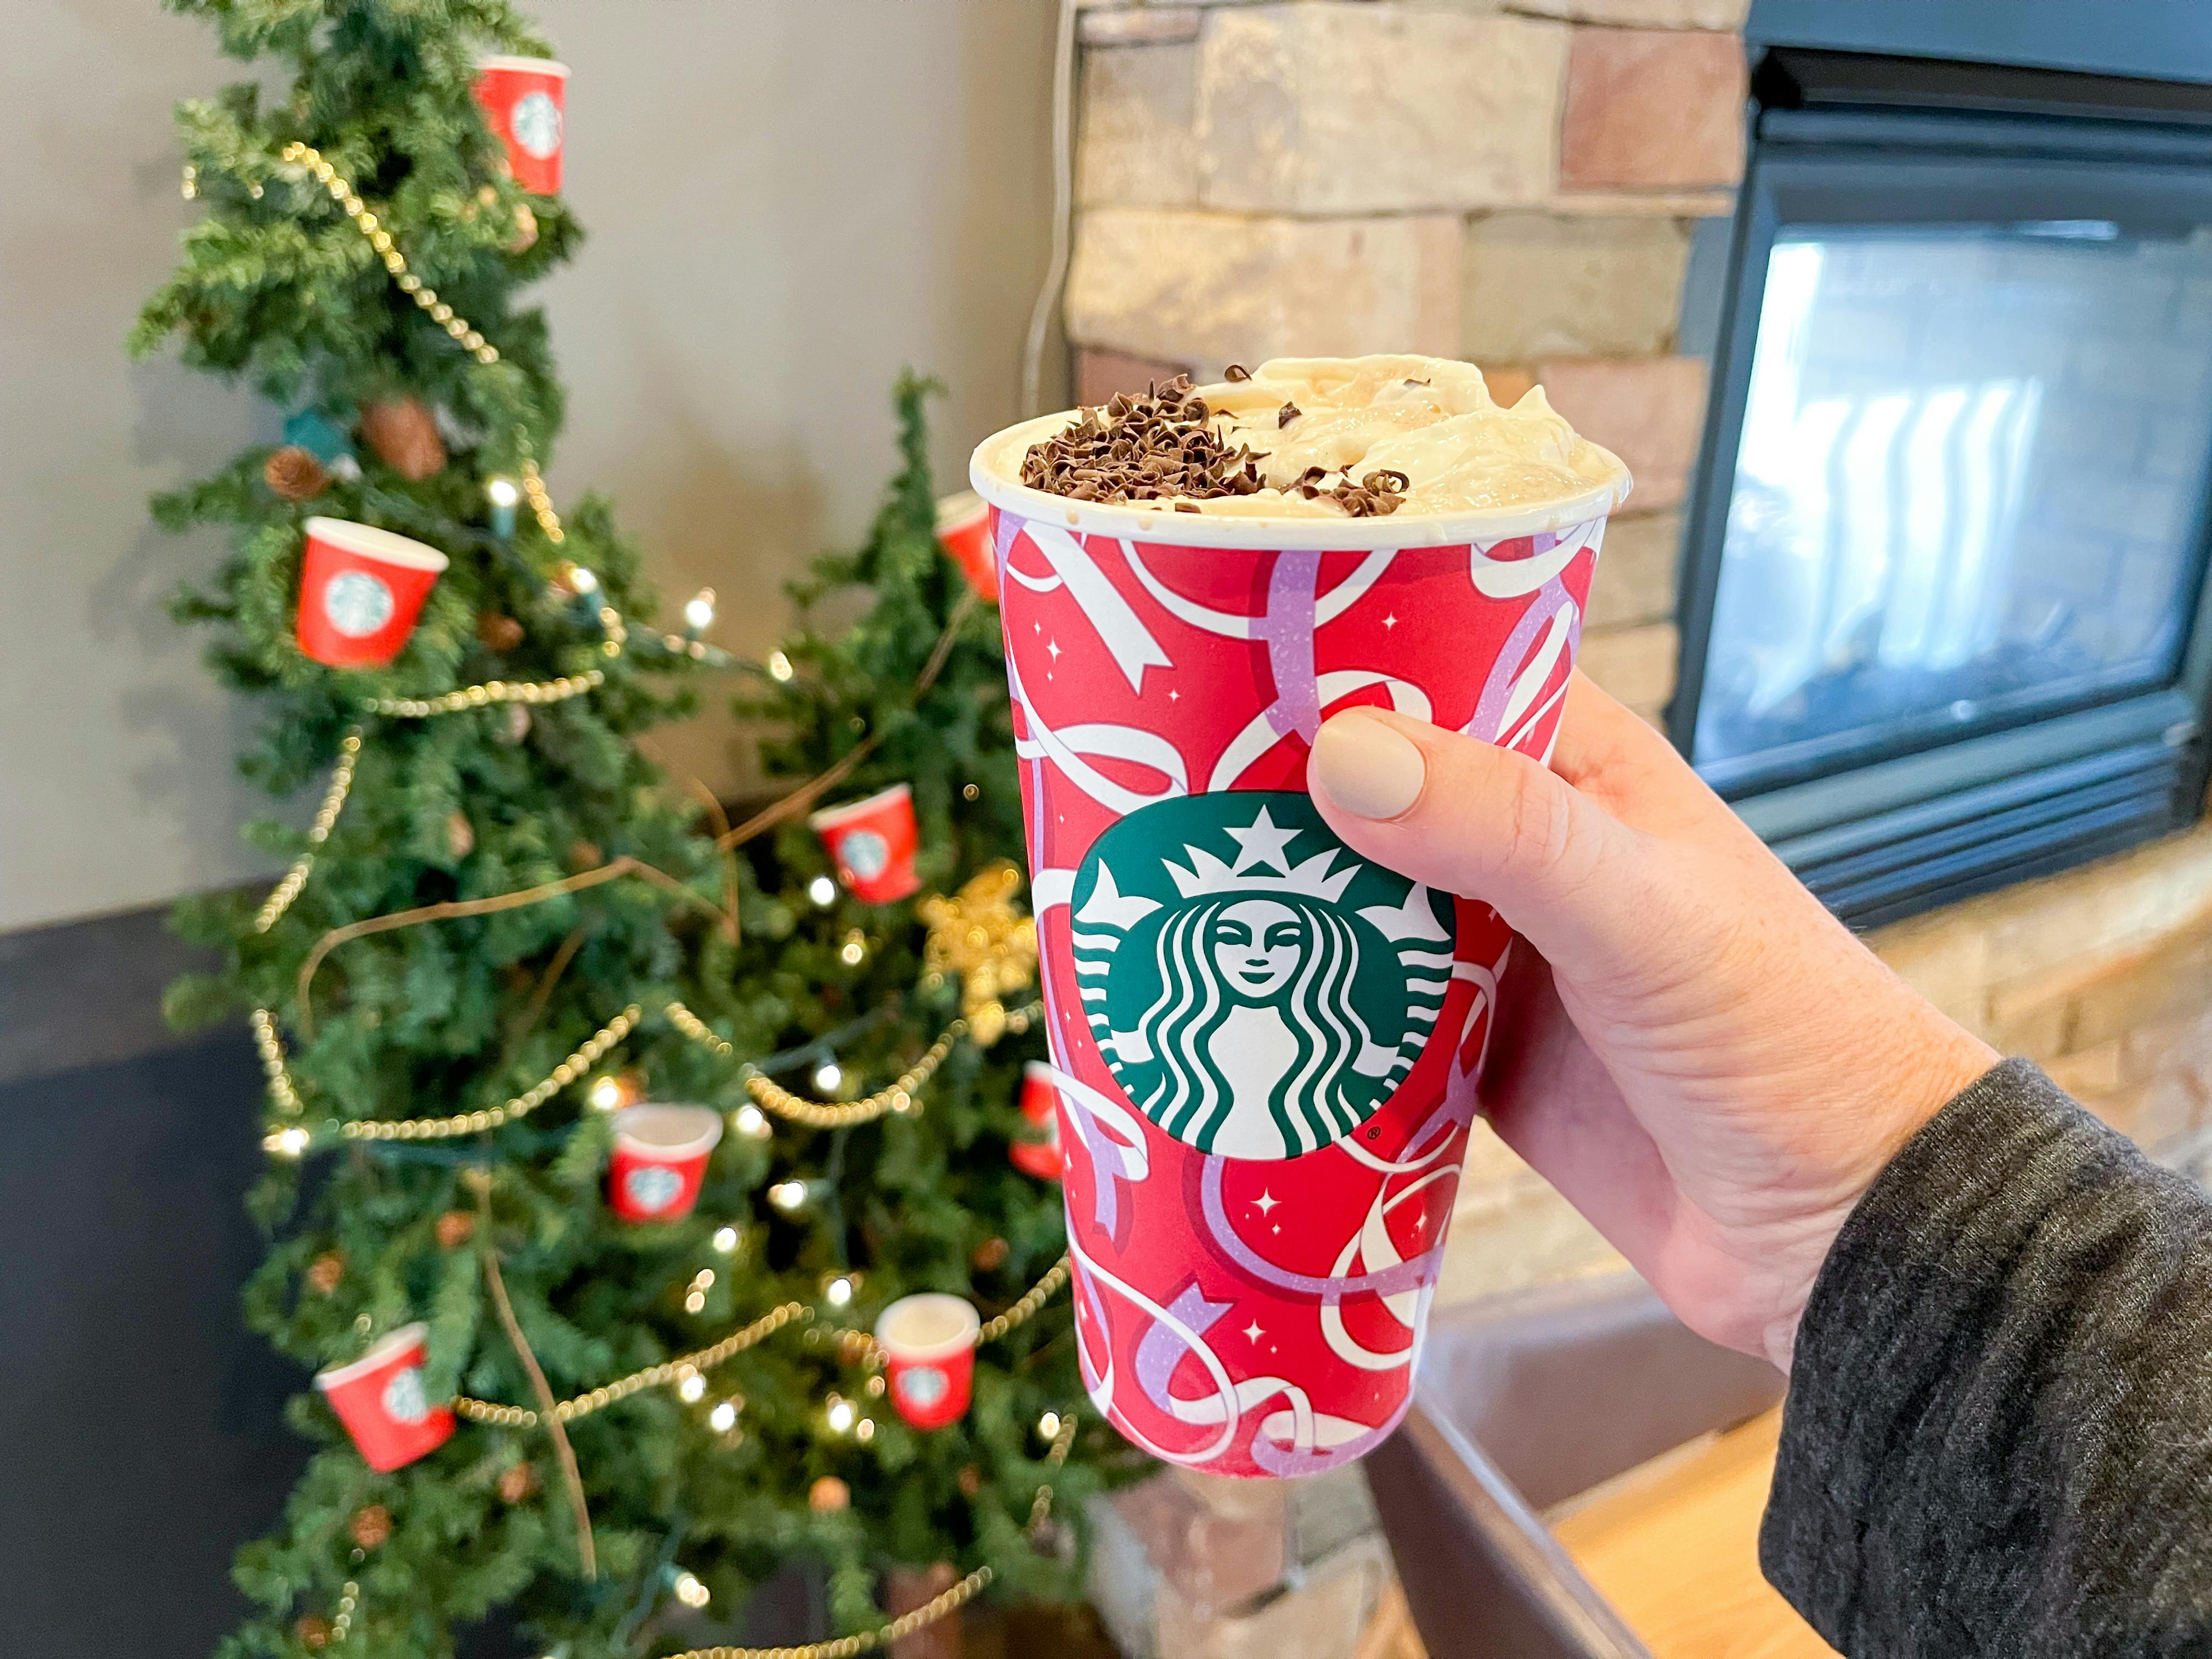 Is Starbucks Open on Christmas Day? Here's The Holiday Schedule The